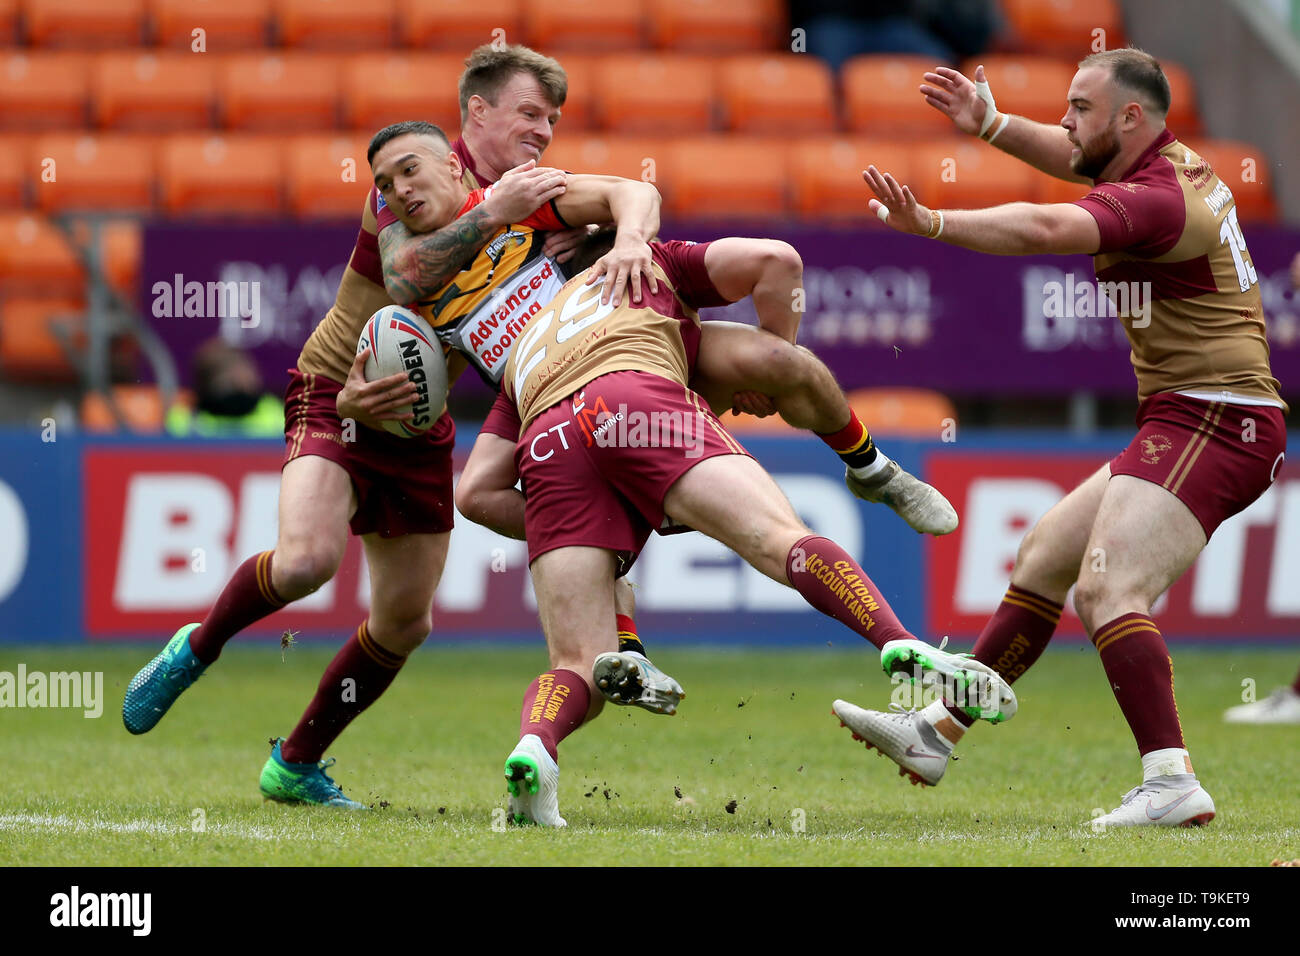 Barrow Raiders Tee Ritson is tackled by Sheffeld Eagles Ben Hellewell and Sheffeld Eagles Anthony Thackeray during the Betfred Championship Summer Bash match at Bloomfield Road, Blackpool. Stock Photo